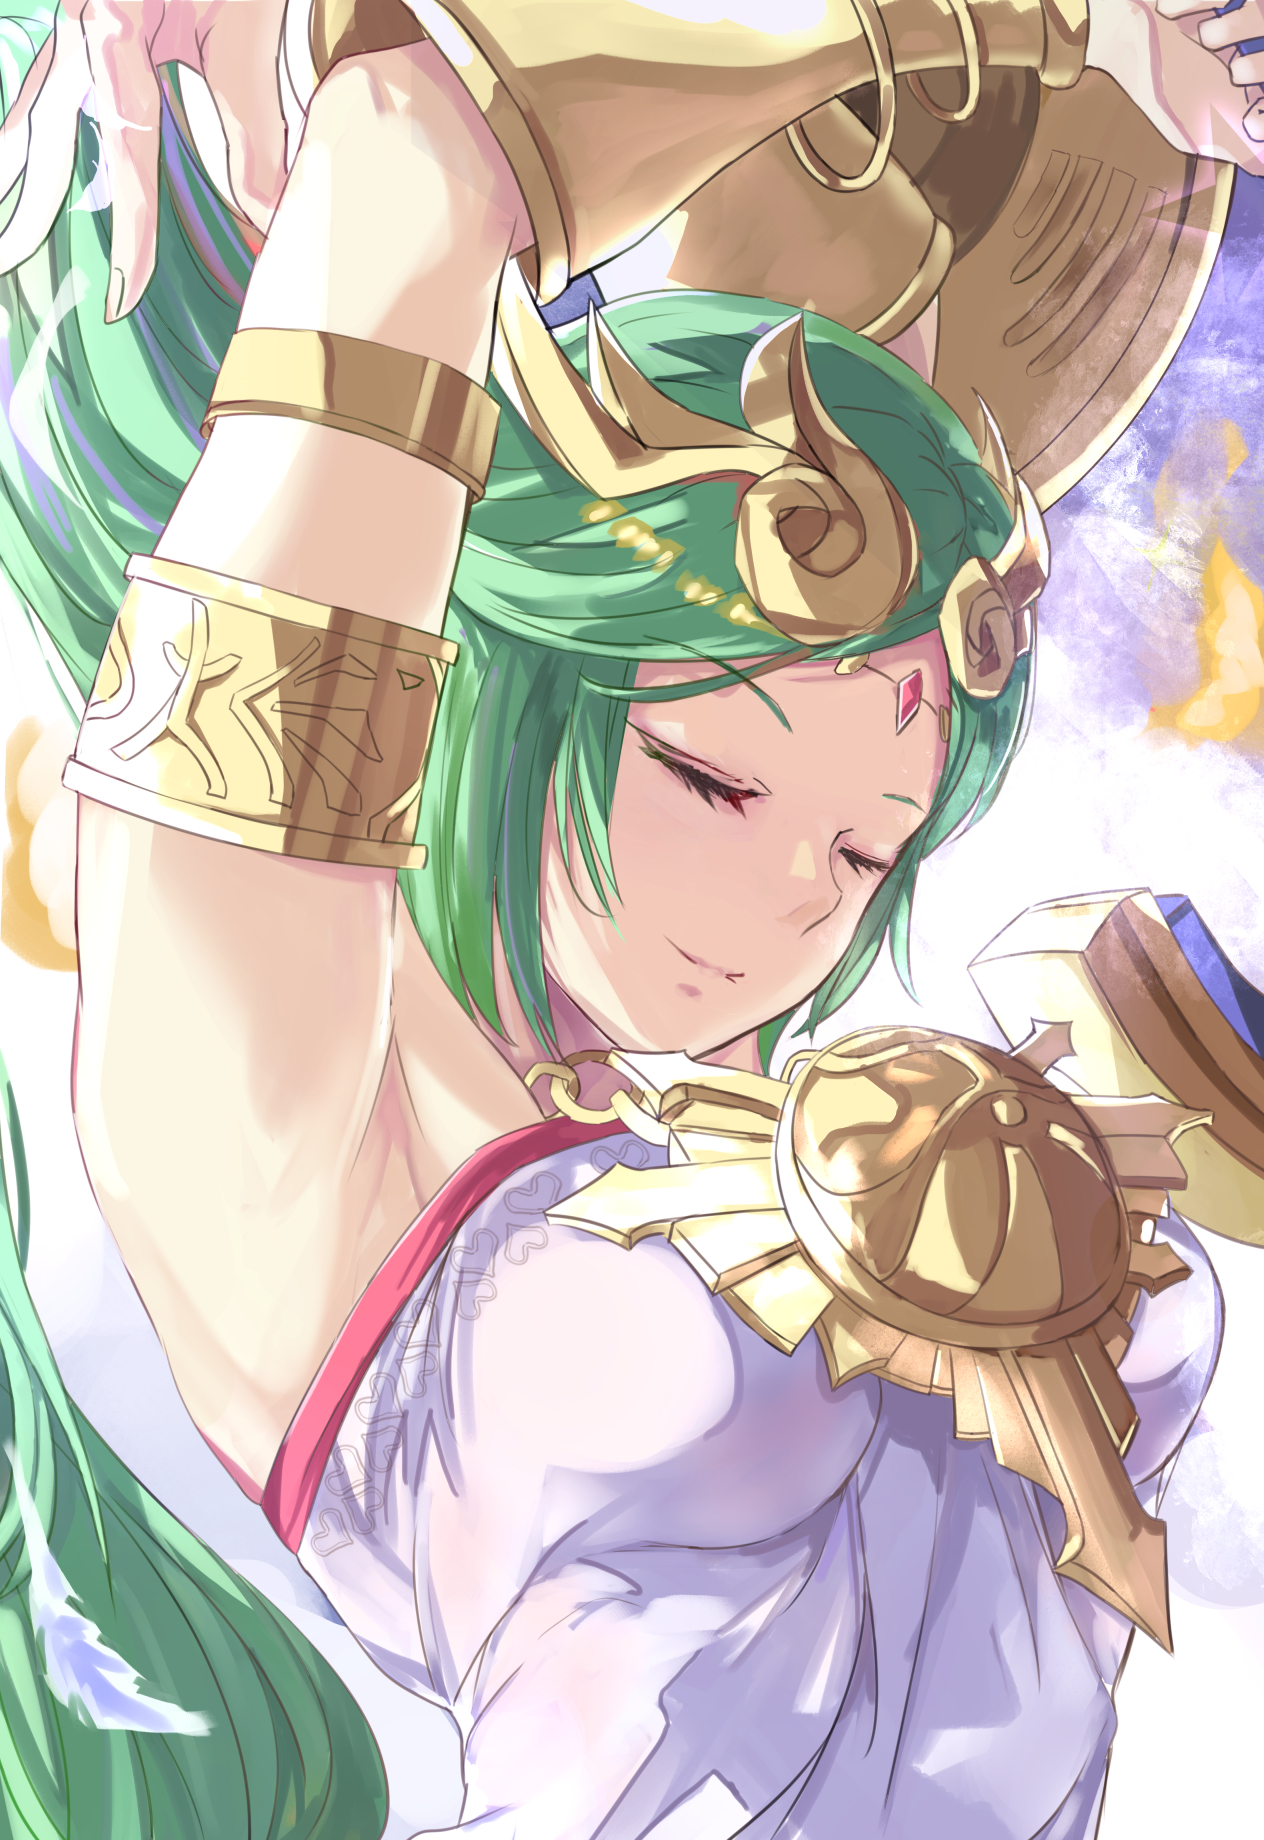 Anime 1264x1840 anime anime girls digital art artwork portrait display Palutena Super Smash Brothers video game characters arms up long hair green hair 2D